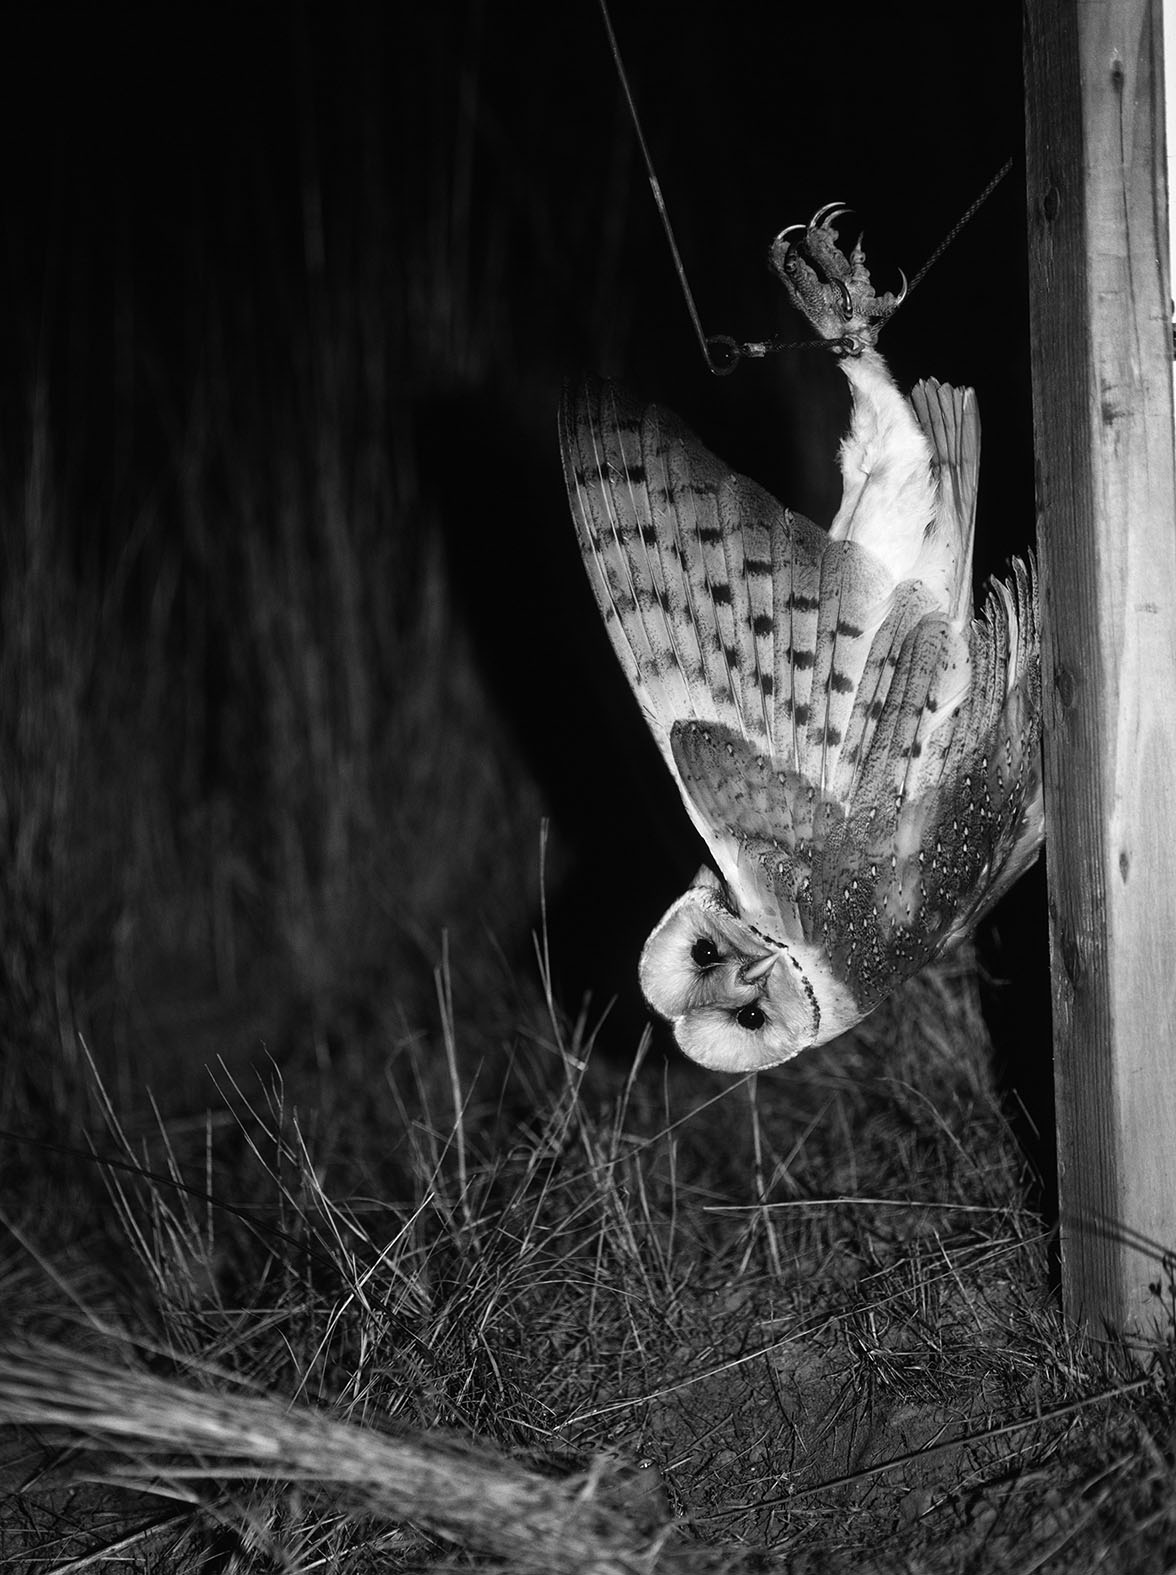 Untitled, Barn Owl Caught in Verbail Trap, 2002